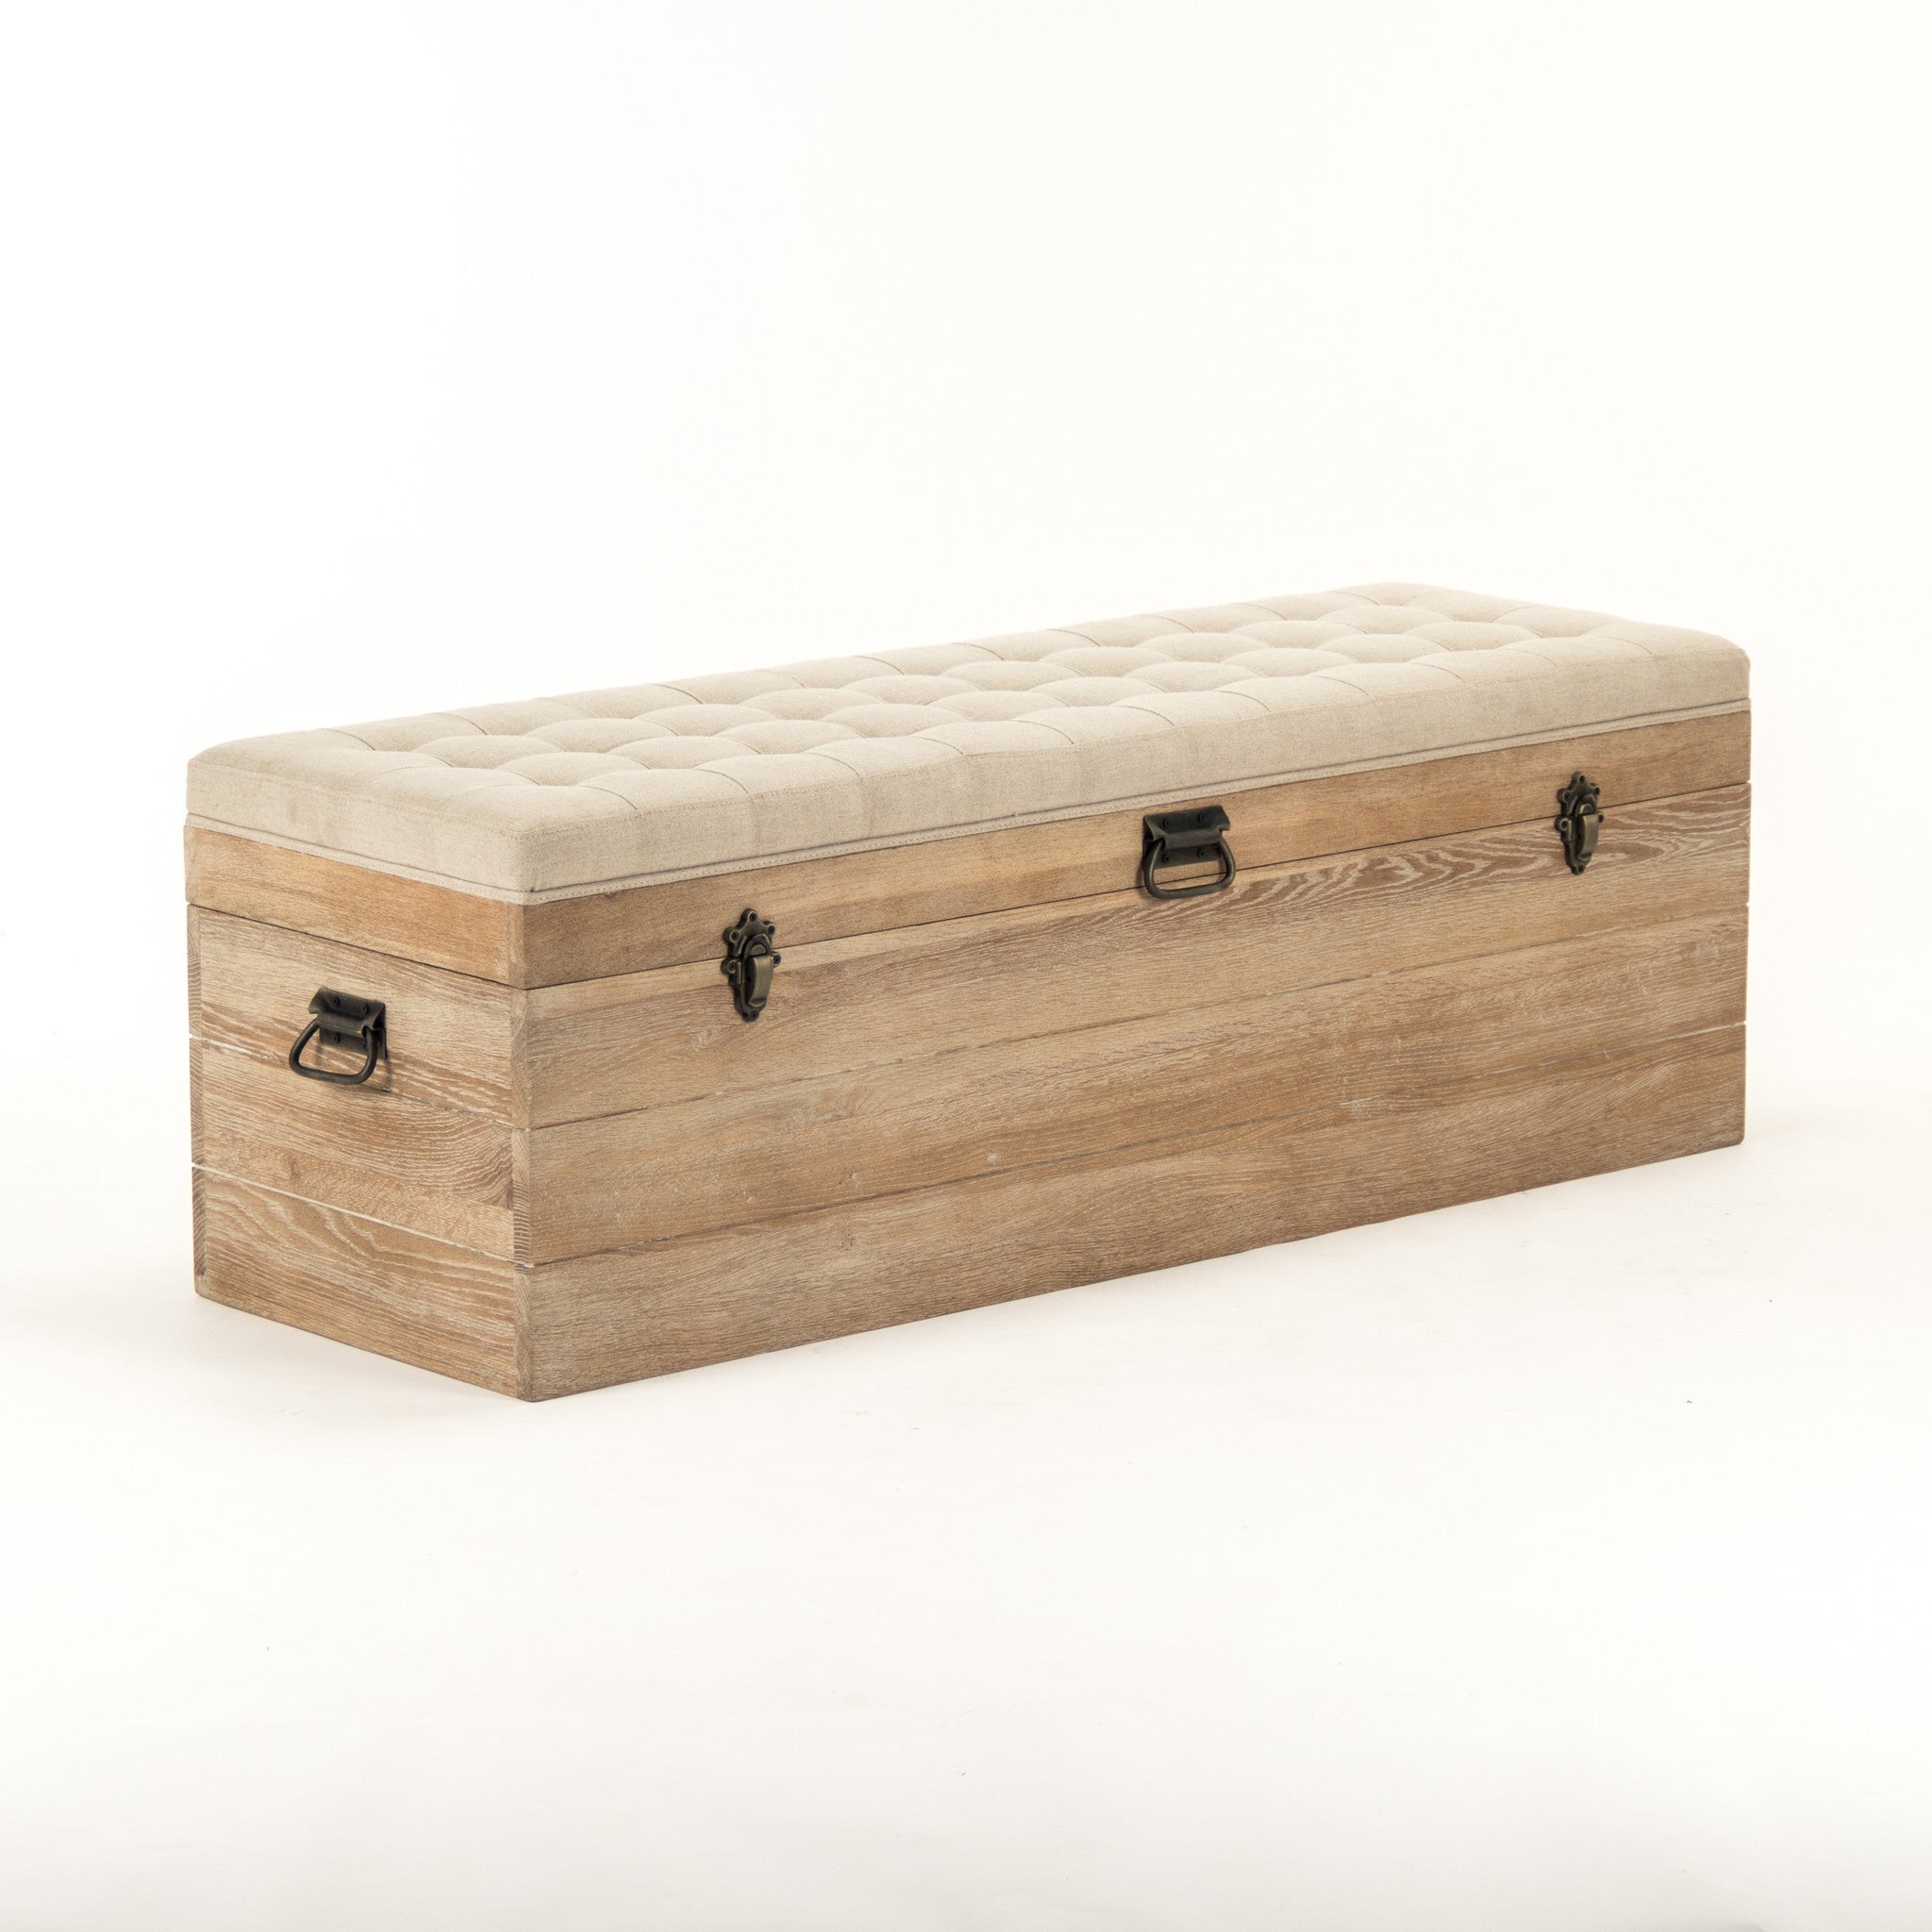 Upholstered Bench with Storage - Angled View | Zentique Stockage Bench